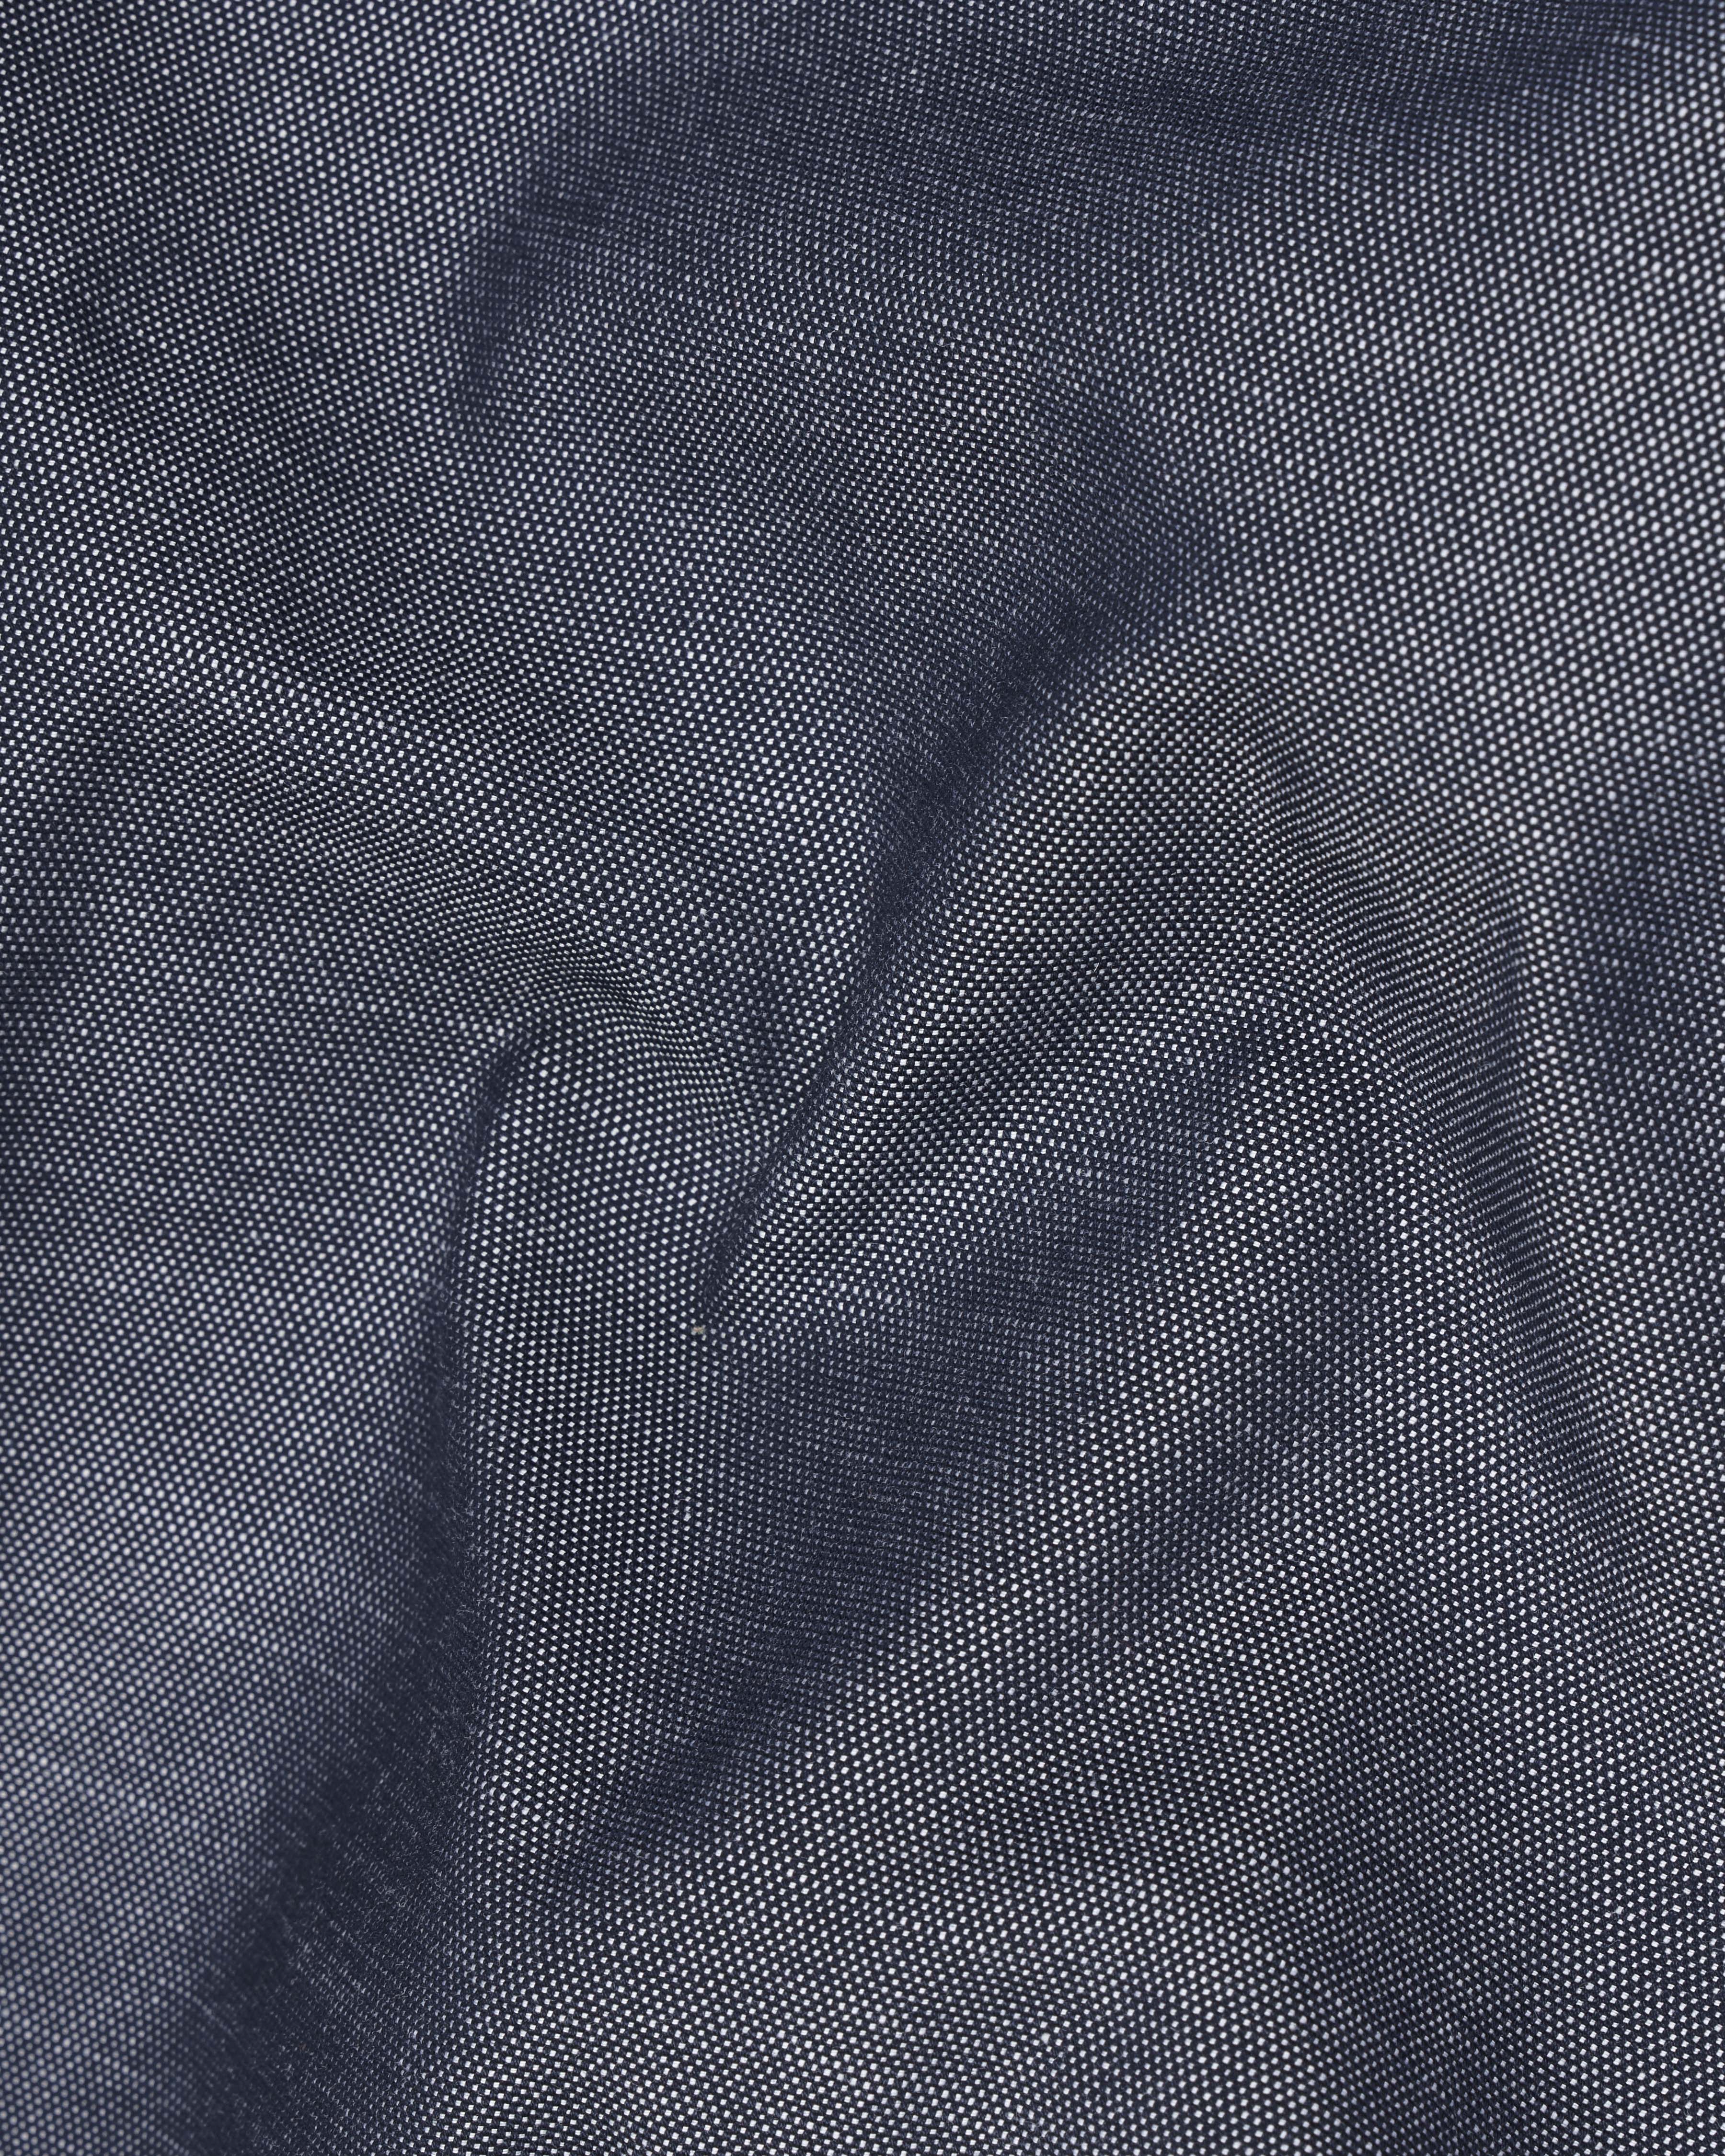 Old blue jean or denim cloth texture Stock Photo by ©smuayc 37002751